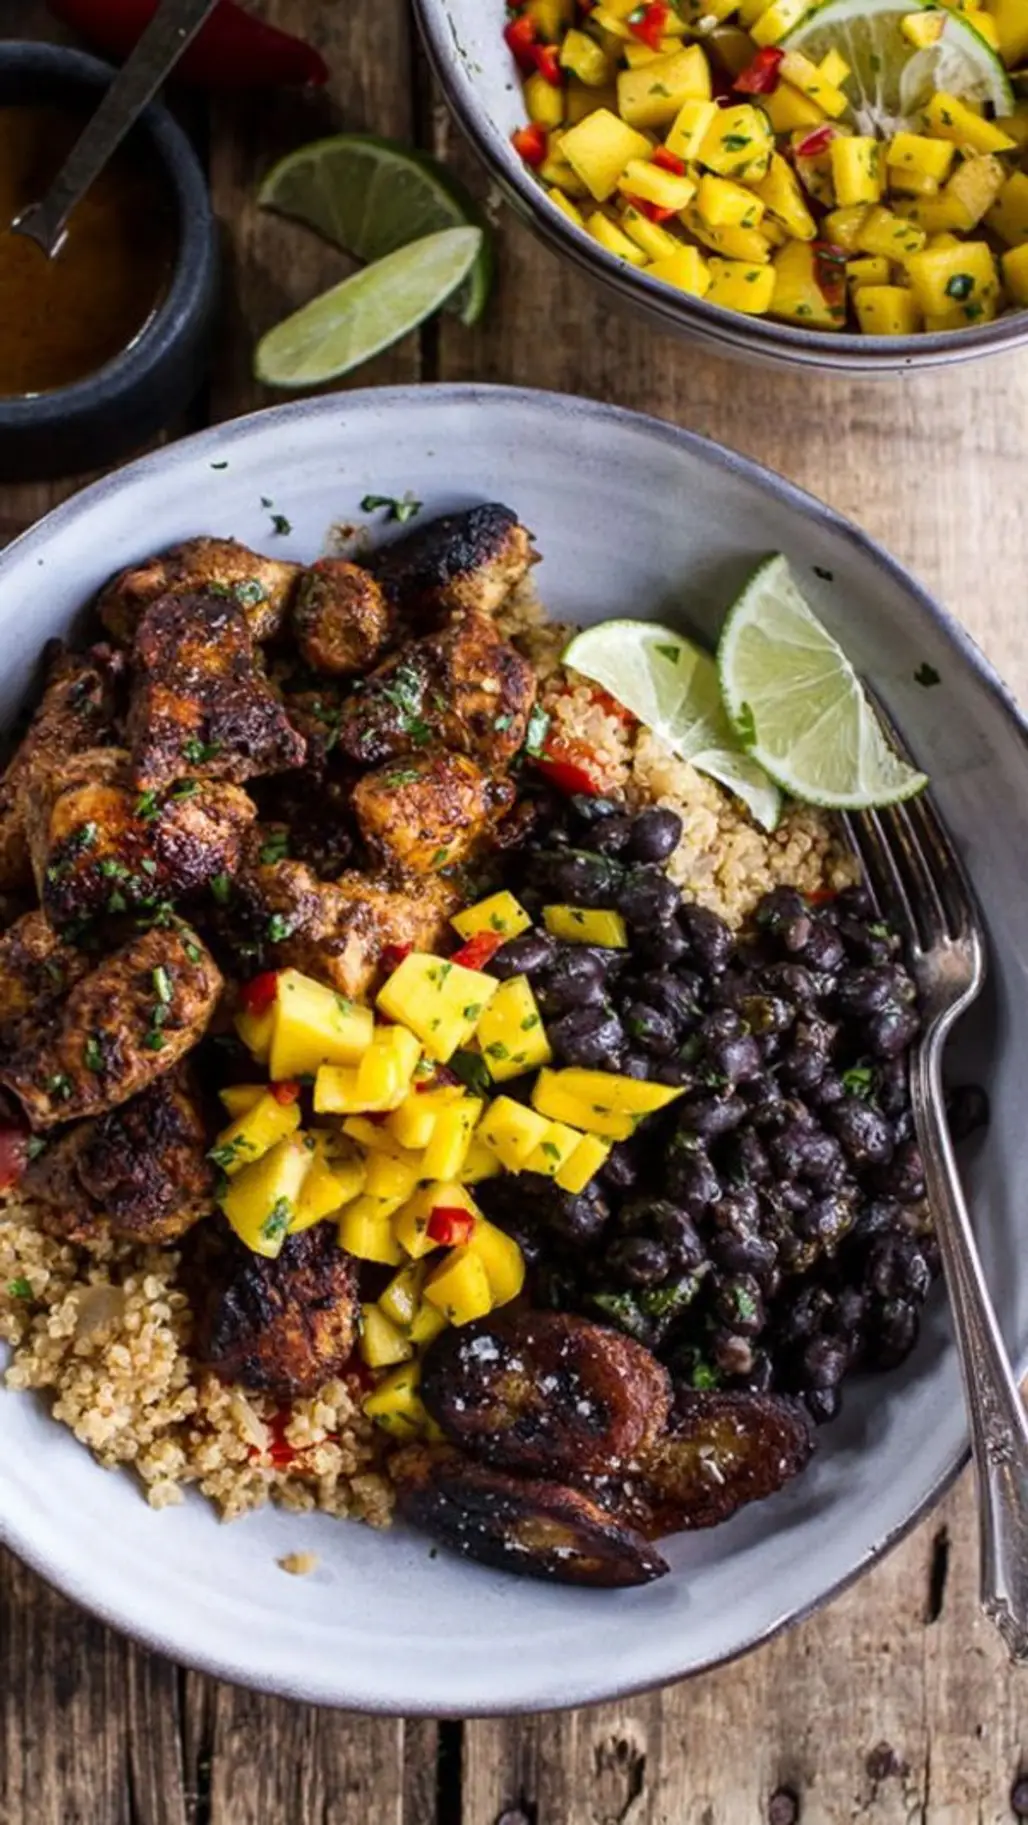 Cuban Chicken and Black Bean Quinoa Bowl with Fried Bananas